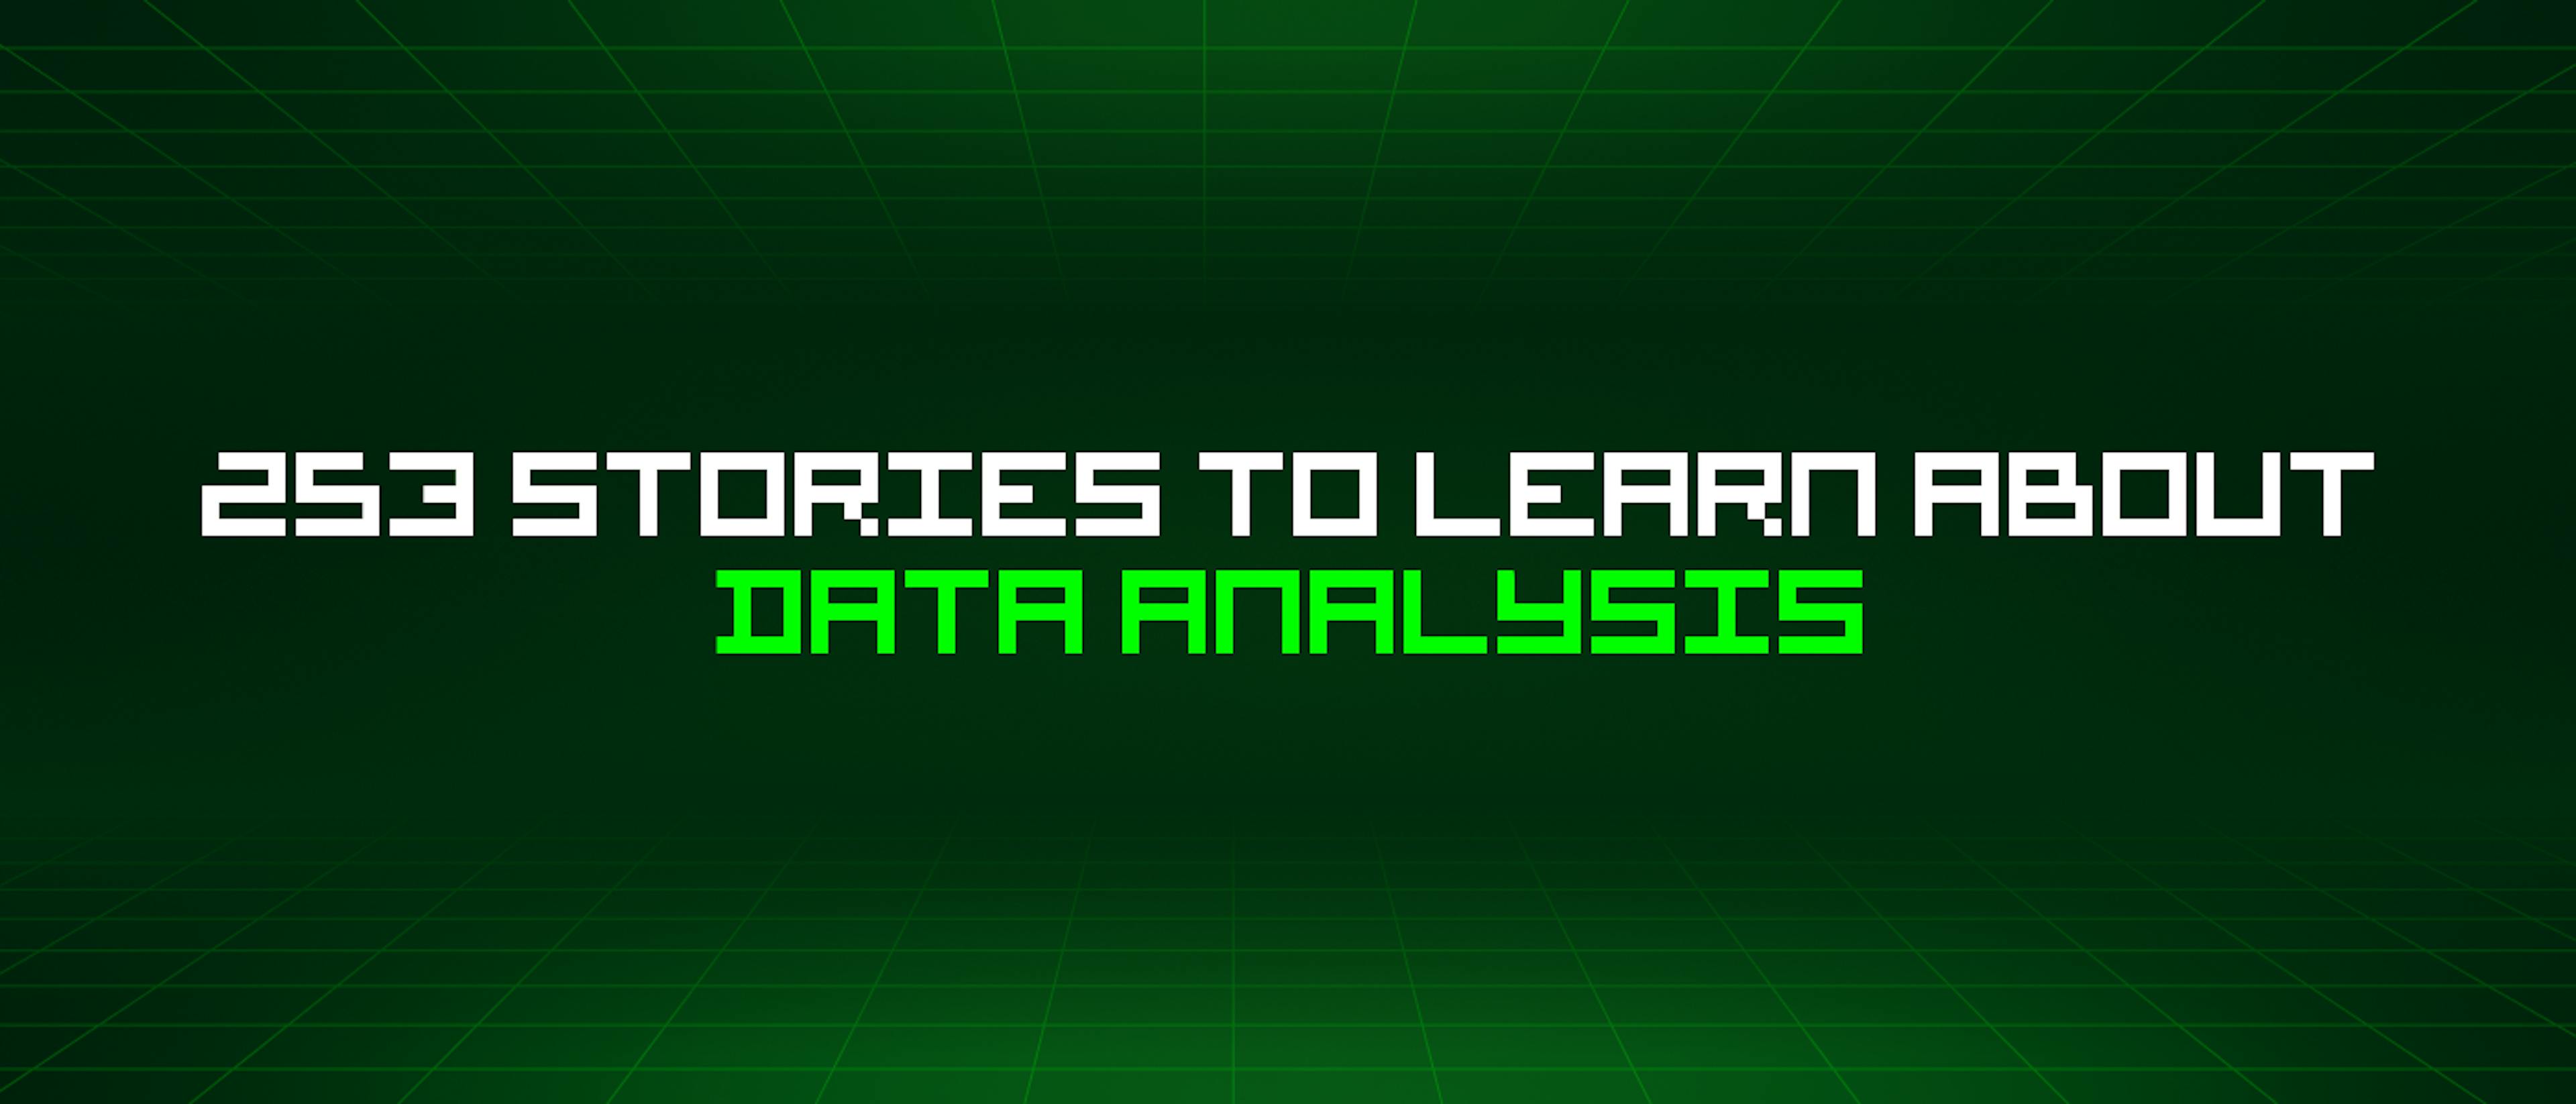 featured image - 253 Stories To Learn About Data Analysis